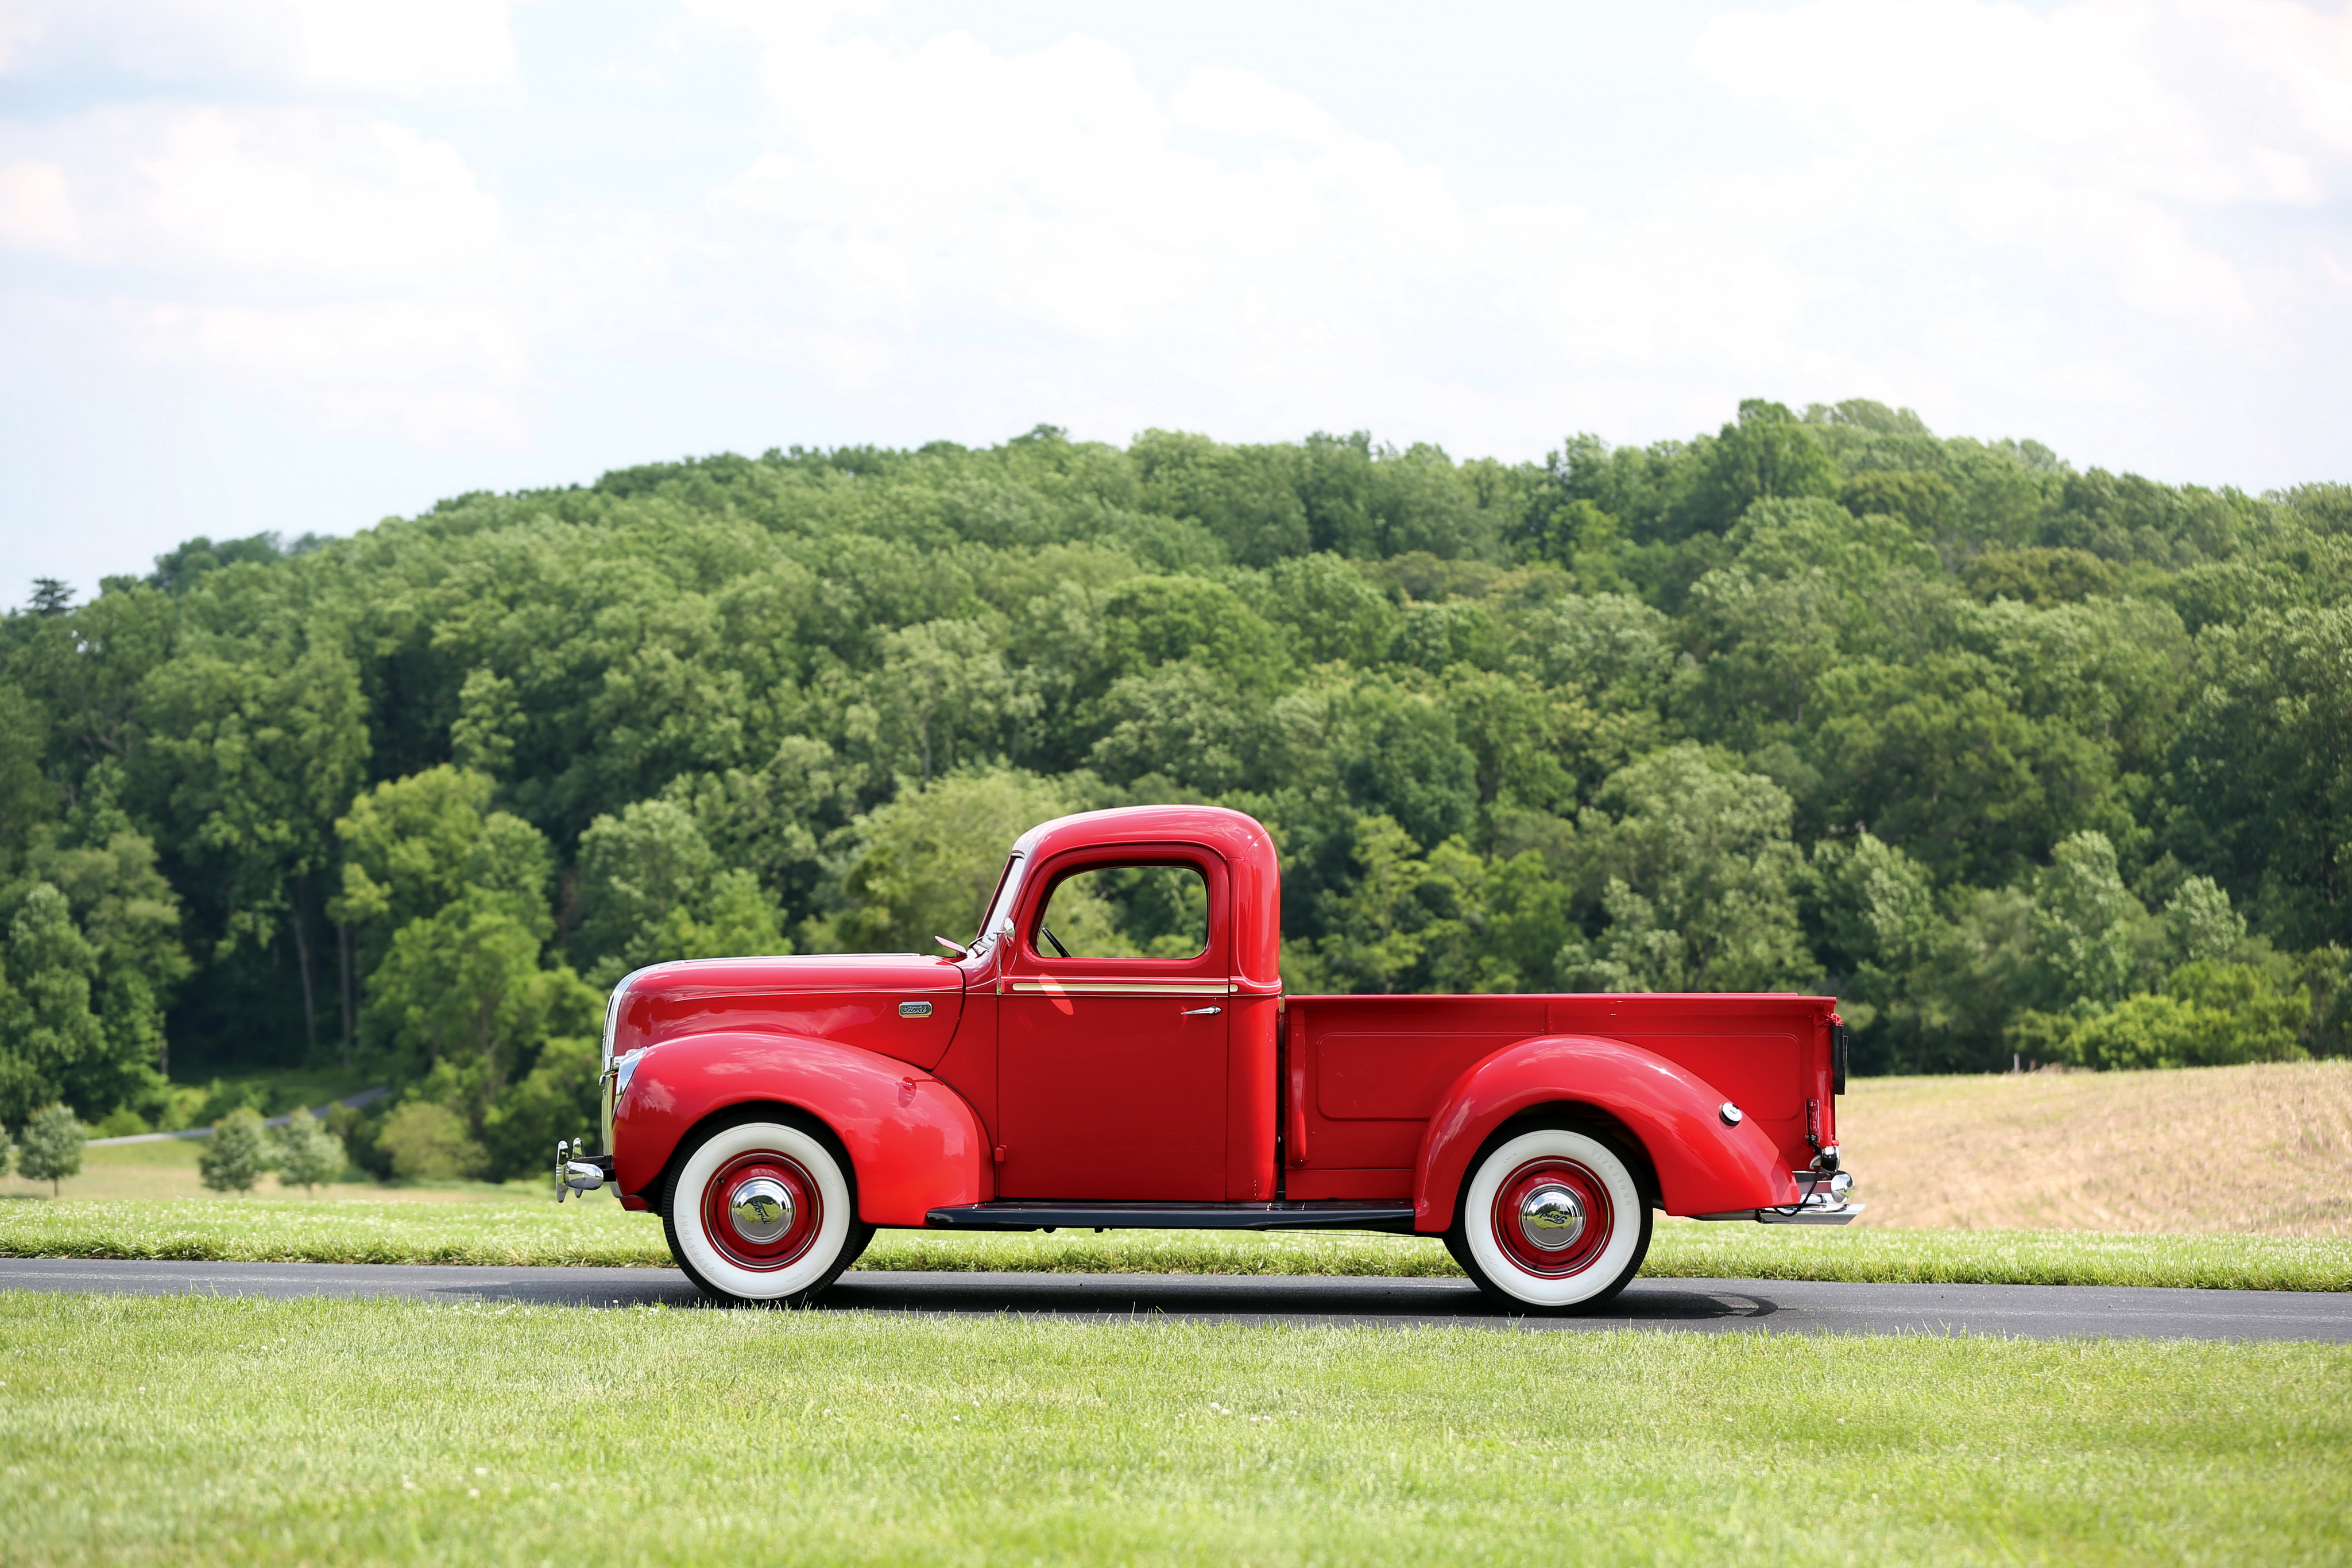 Ford Deluxe Pickup Wallpapers